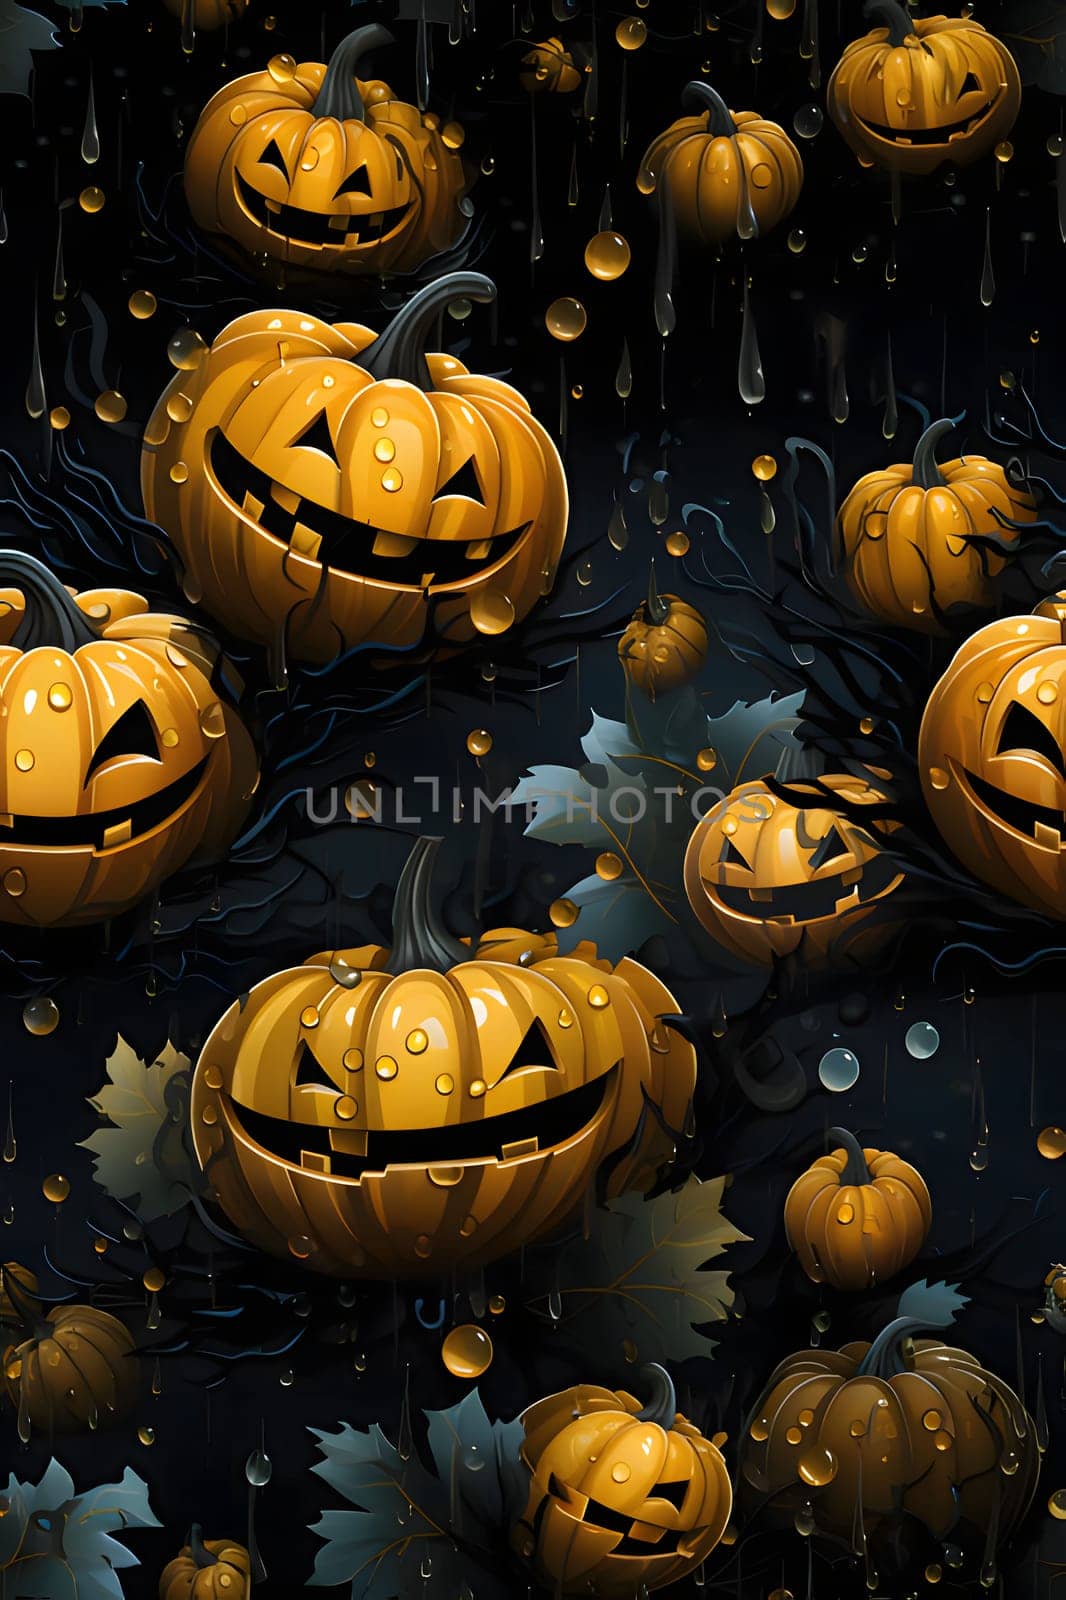 Jack-o-lantern pumpkins and rain as abstract background, wallpaper, banner, texture design with pattern - vector. Dark colors. by ThemesS